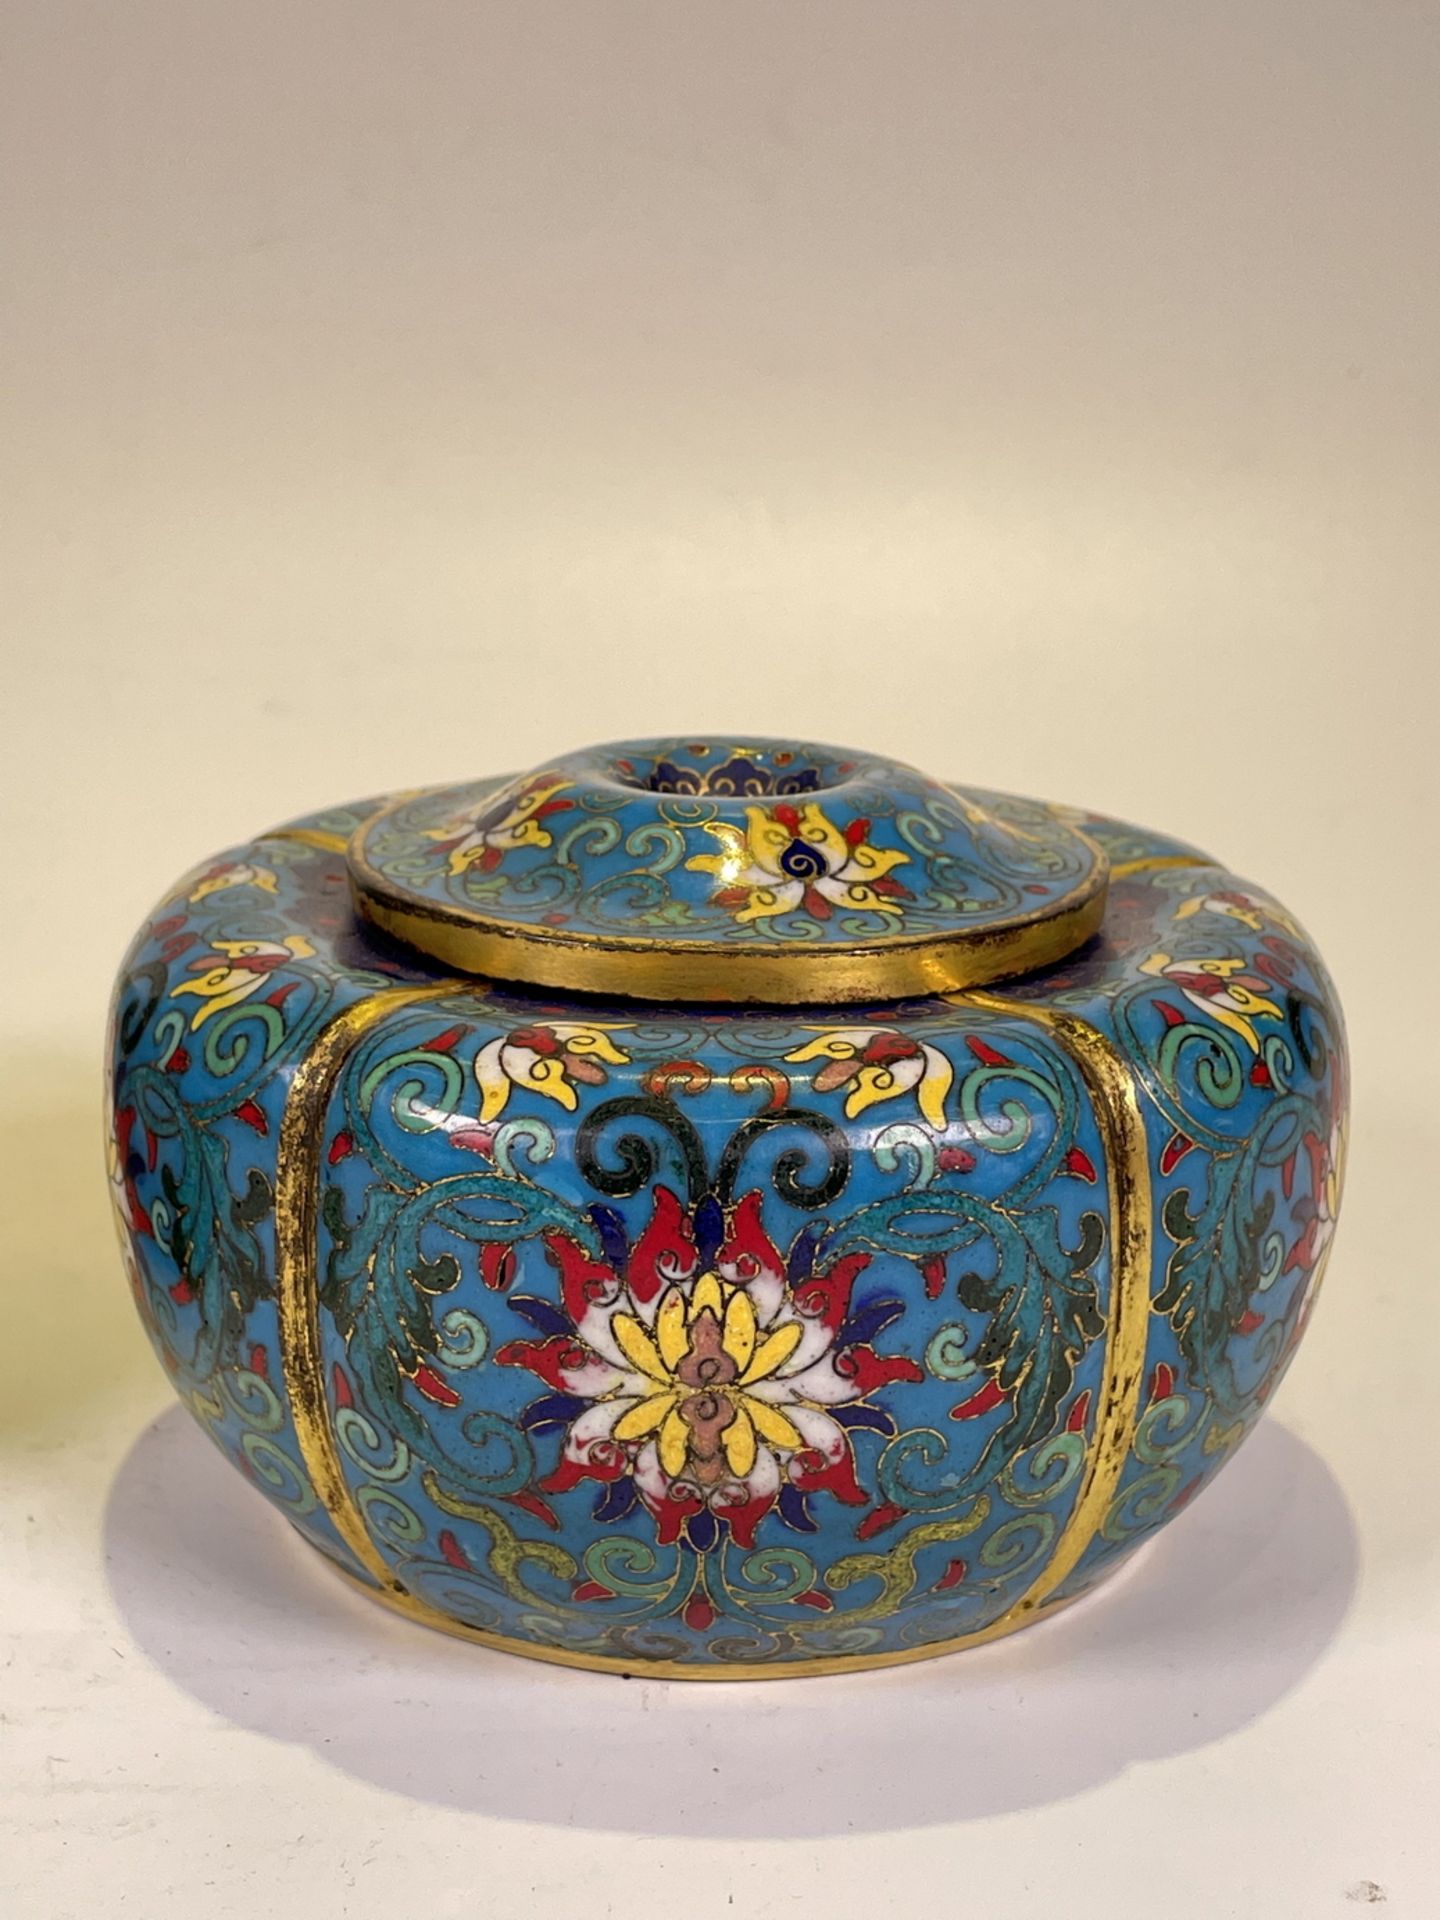 FINE CHINESE CLOISONNE, 18TH/19TH Century Pr. Collection of NARA private gallary.  - Image 2 of 6